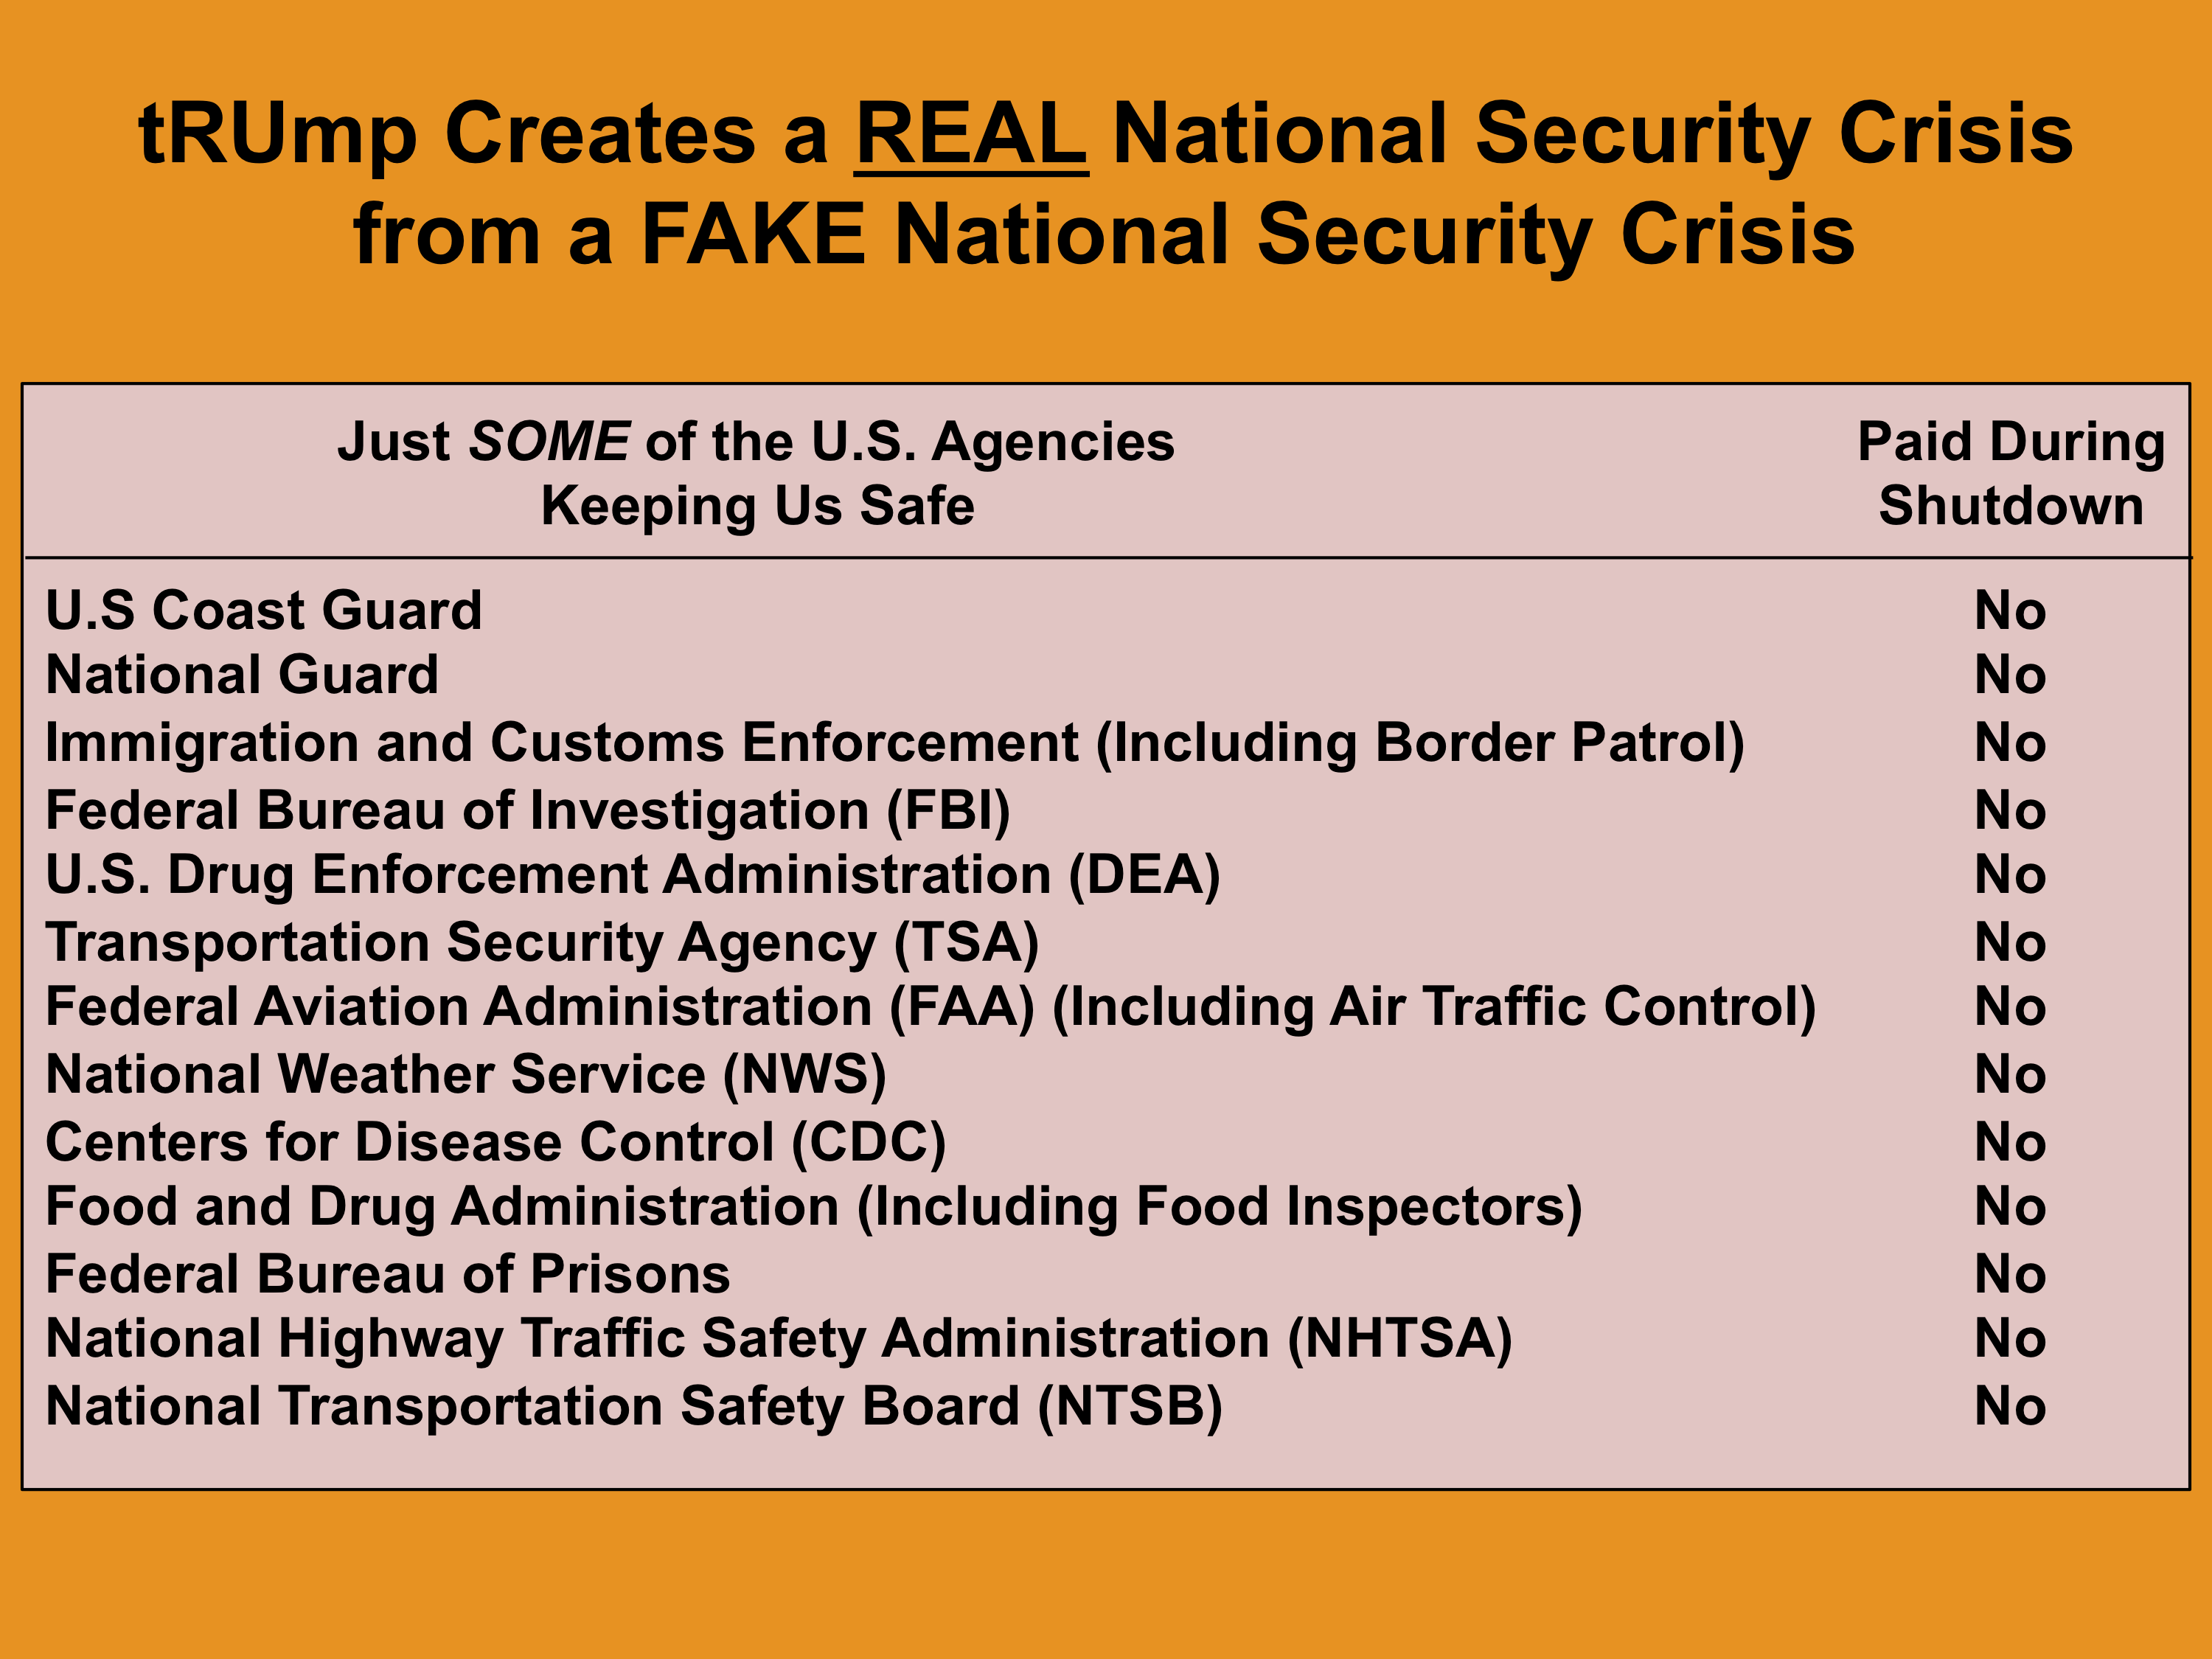 tRUmp creates a real national security crisis from a fake one